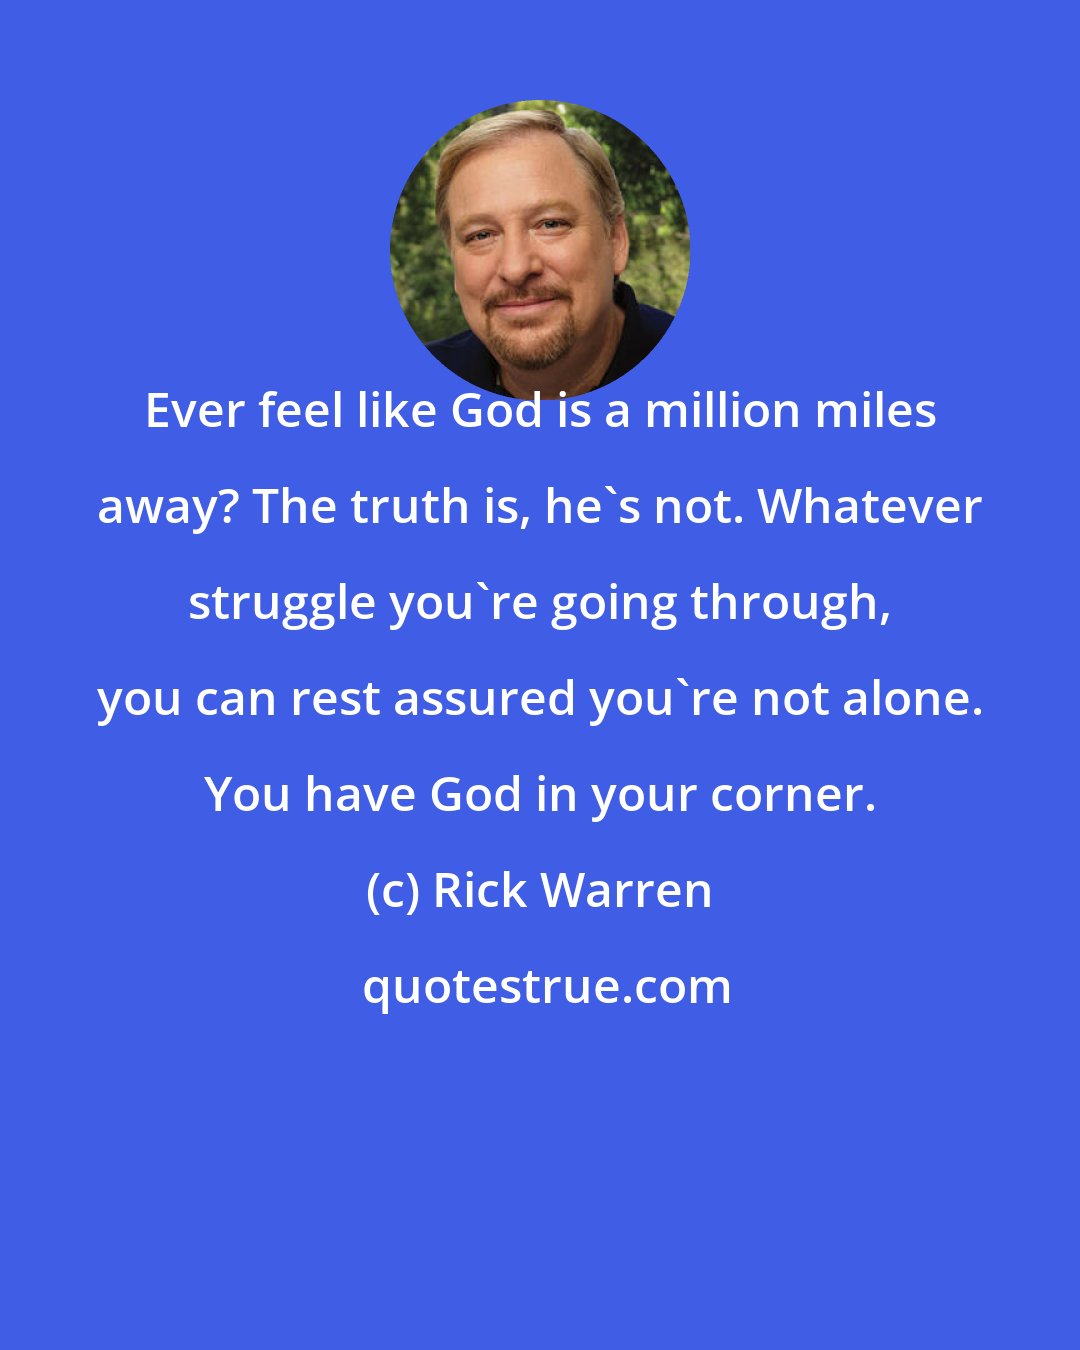 Rick Warren: Ever feel like God is a million miles away? The truth is, he's not. Whatever struggle you're going through, you can rest assured you're not alone. You have God in your corner.